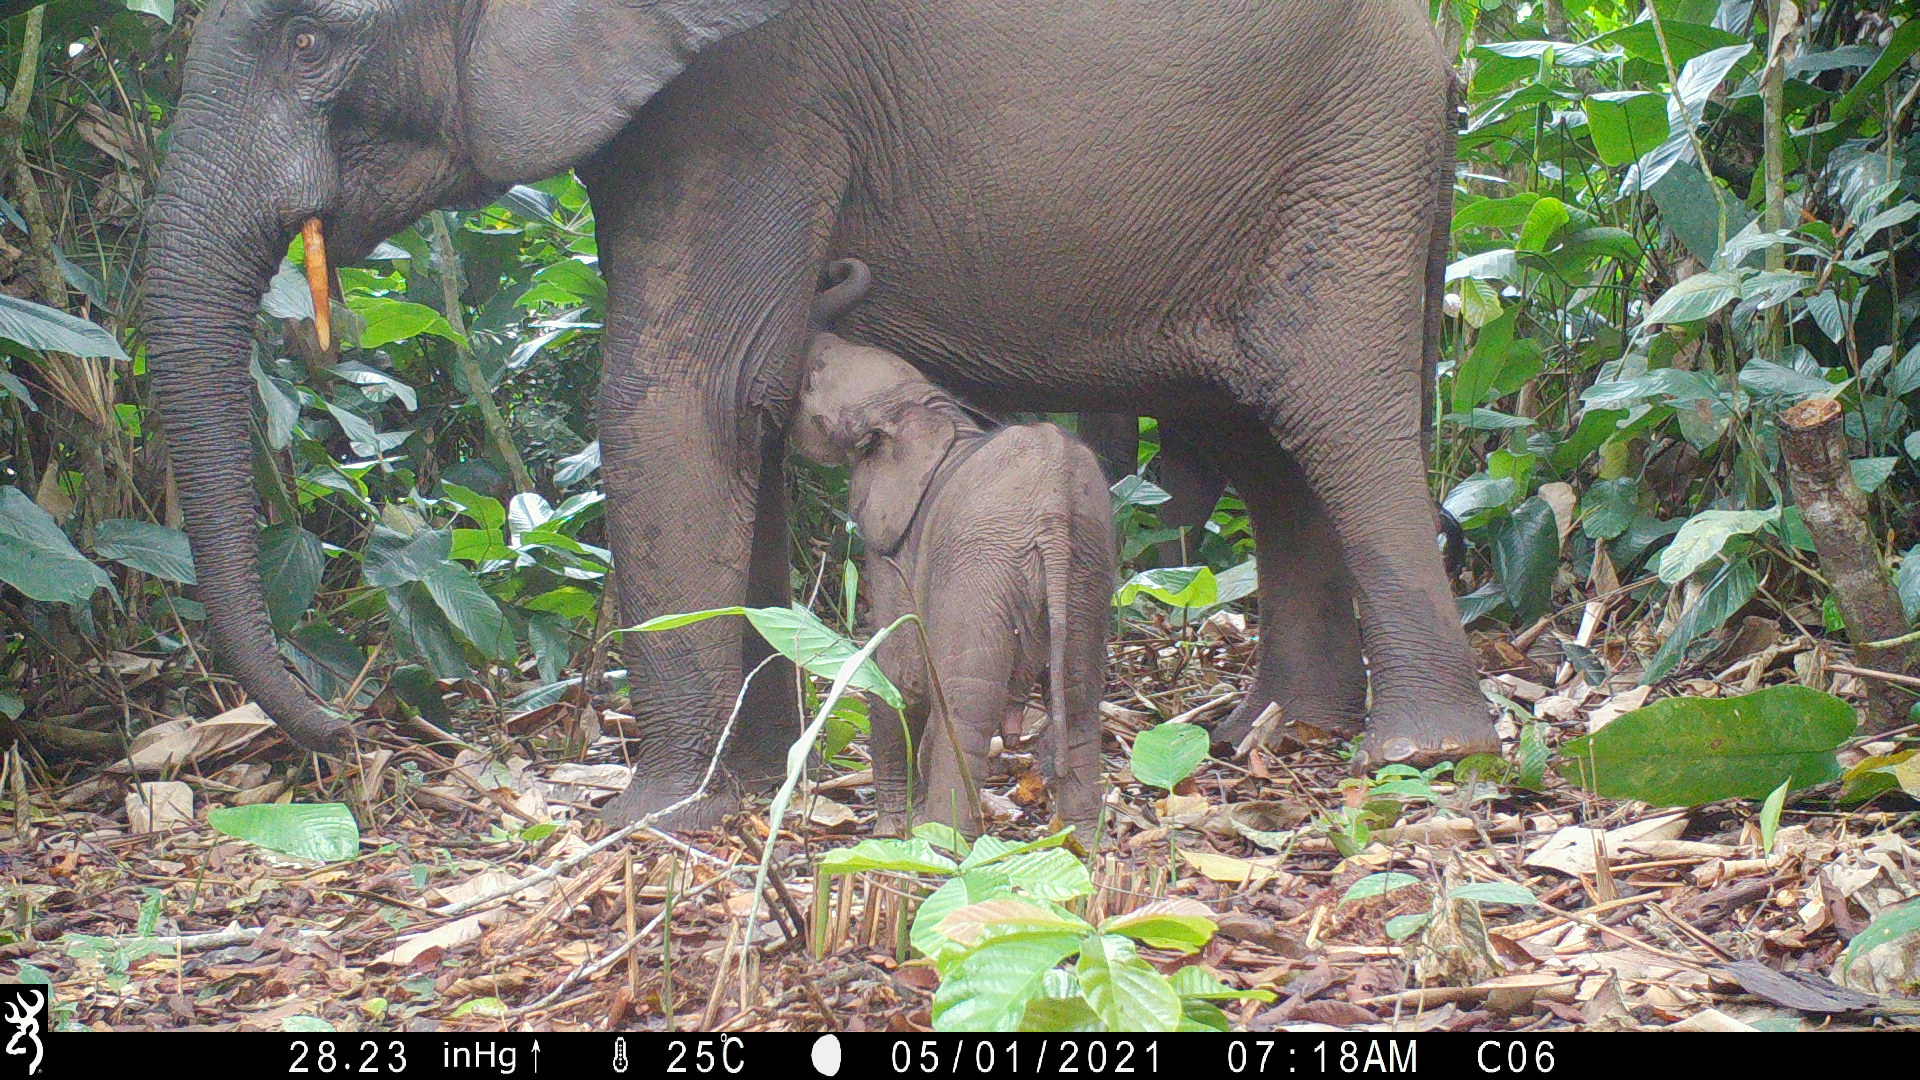 mother and baby elephant in forest on camera trap image